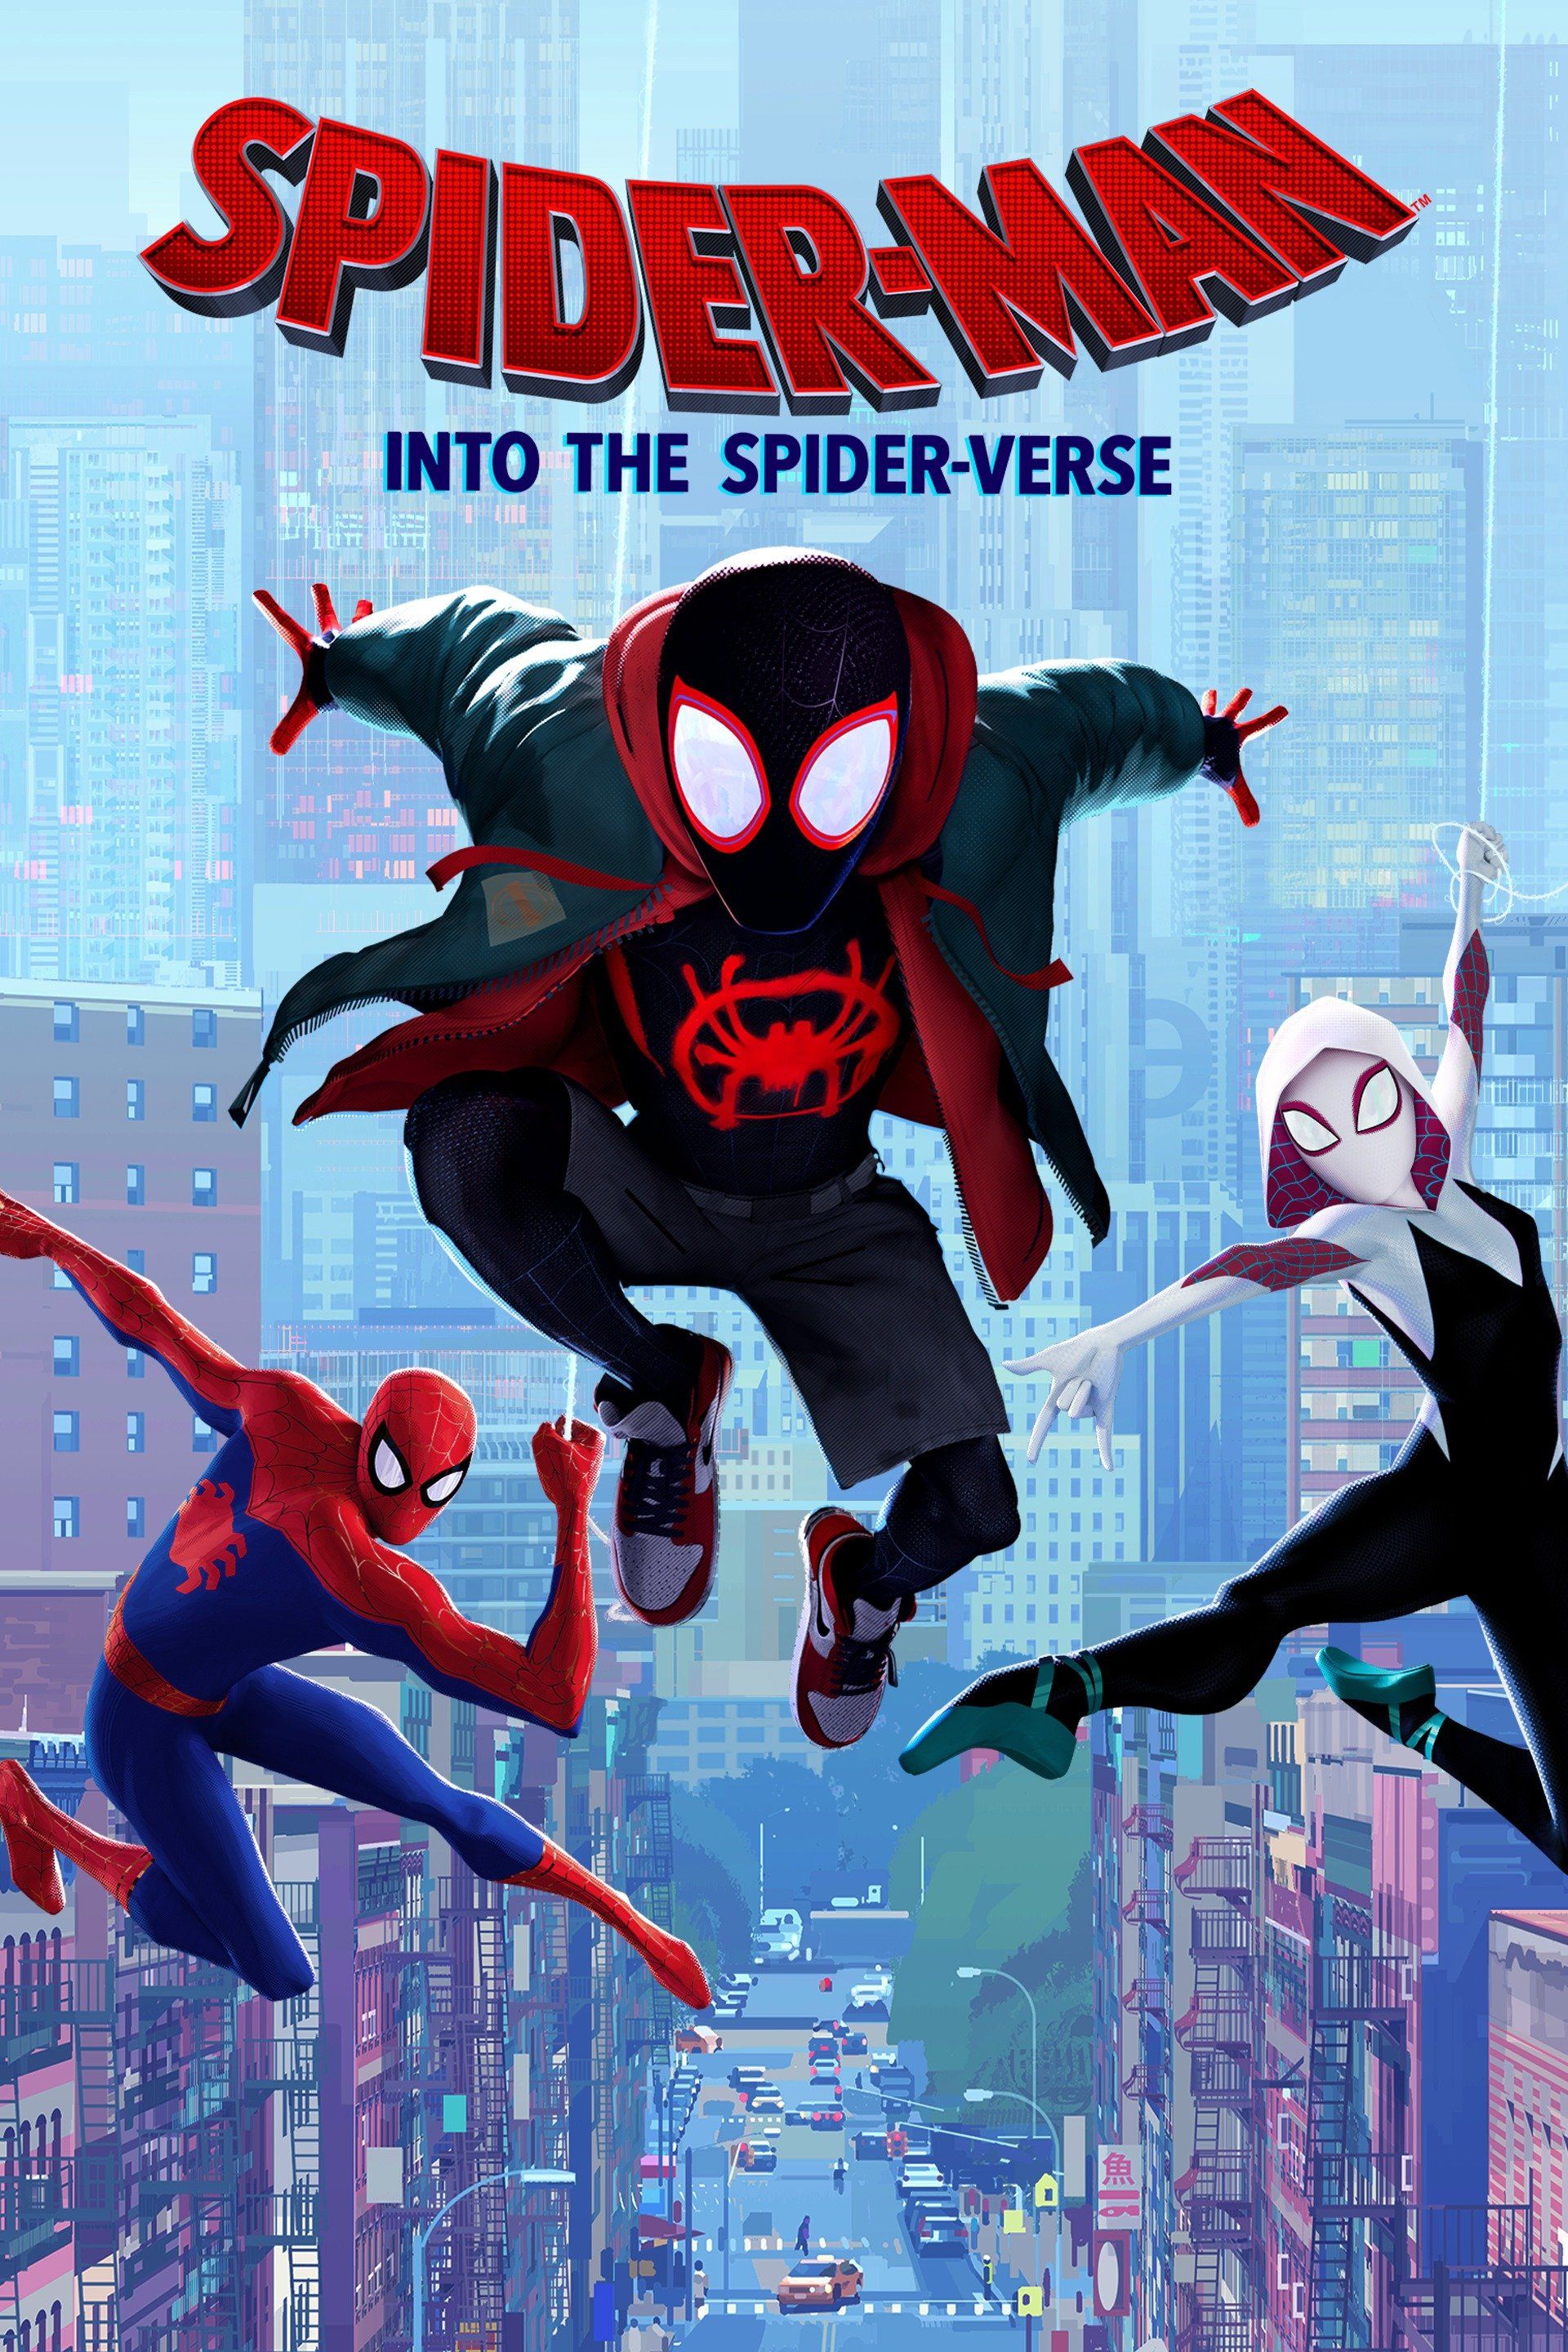 Spider-Man Animated Movie Coming in 2018